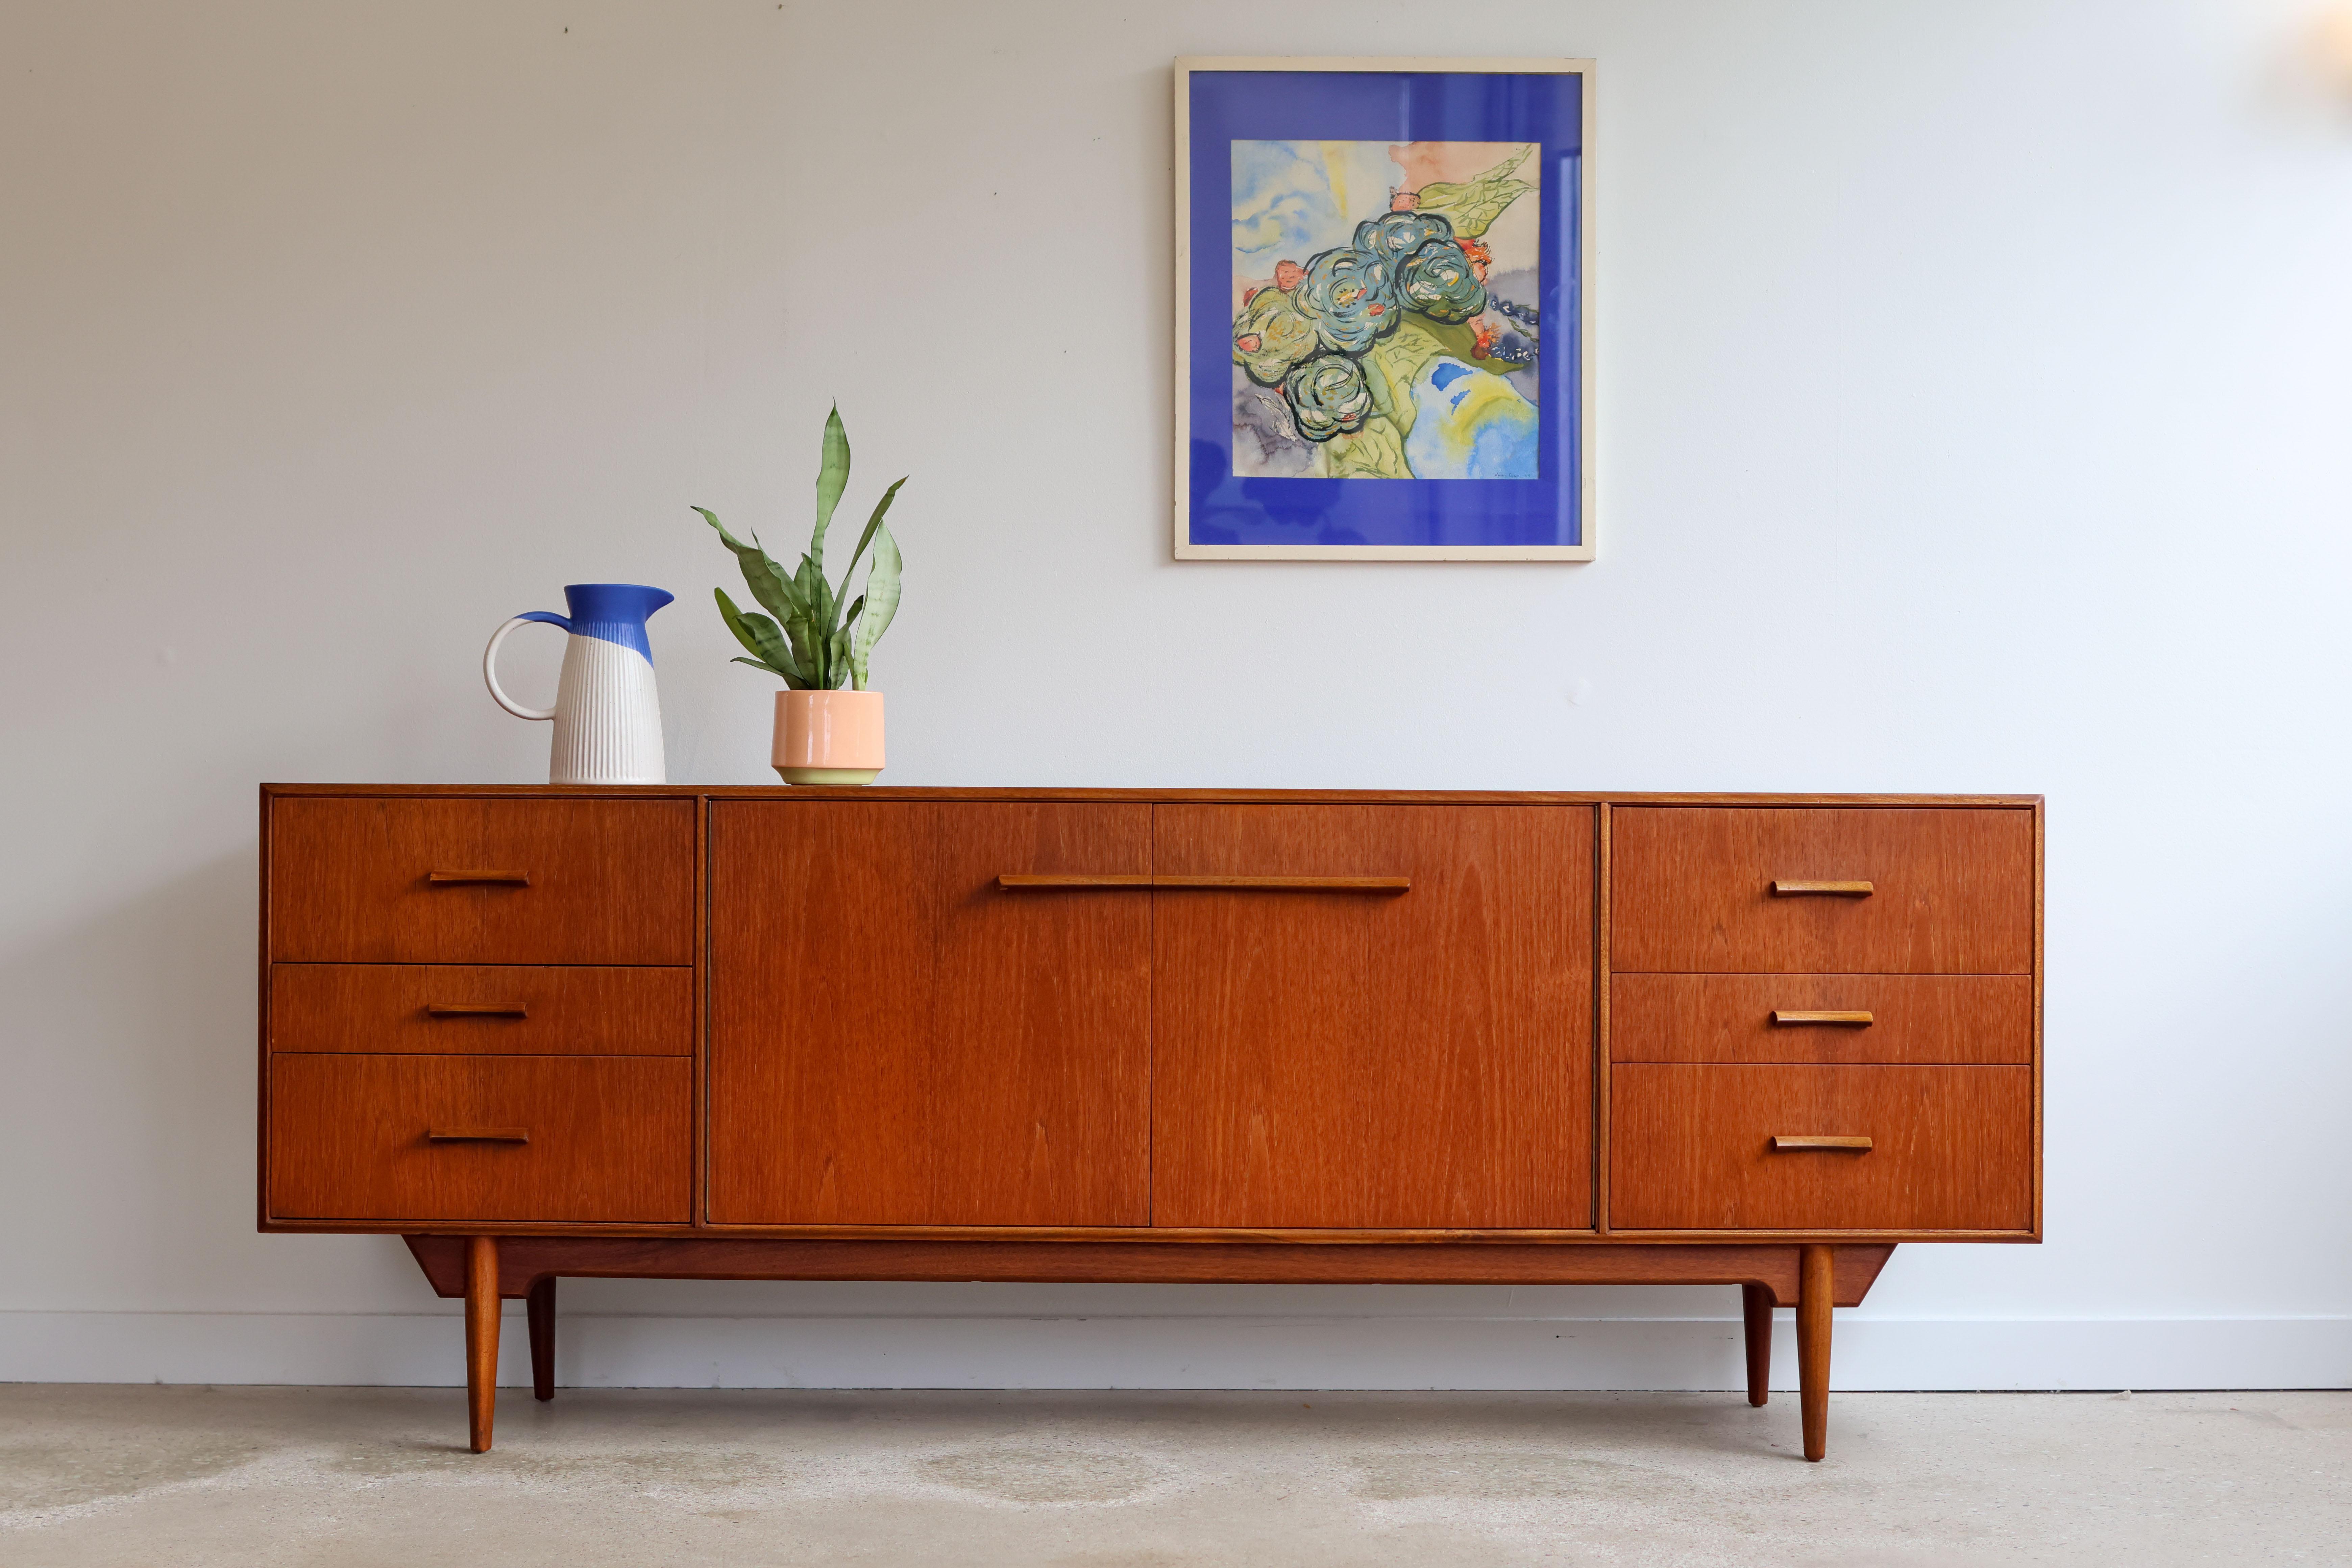 Mid-Century Modern teakwood sideboard.
Unique design by McIntosh, Scotland, 1960s.
Six dovetailed drawers with oak handles.
Double cabinet doors with stationary shelving inside.
Beautifully refinished top.
Excellent vintage condition.

79 1/4” long